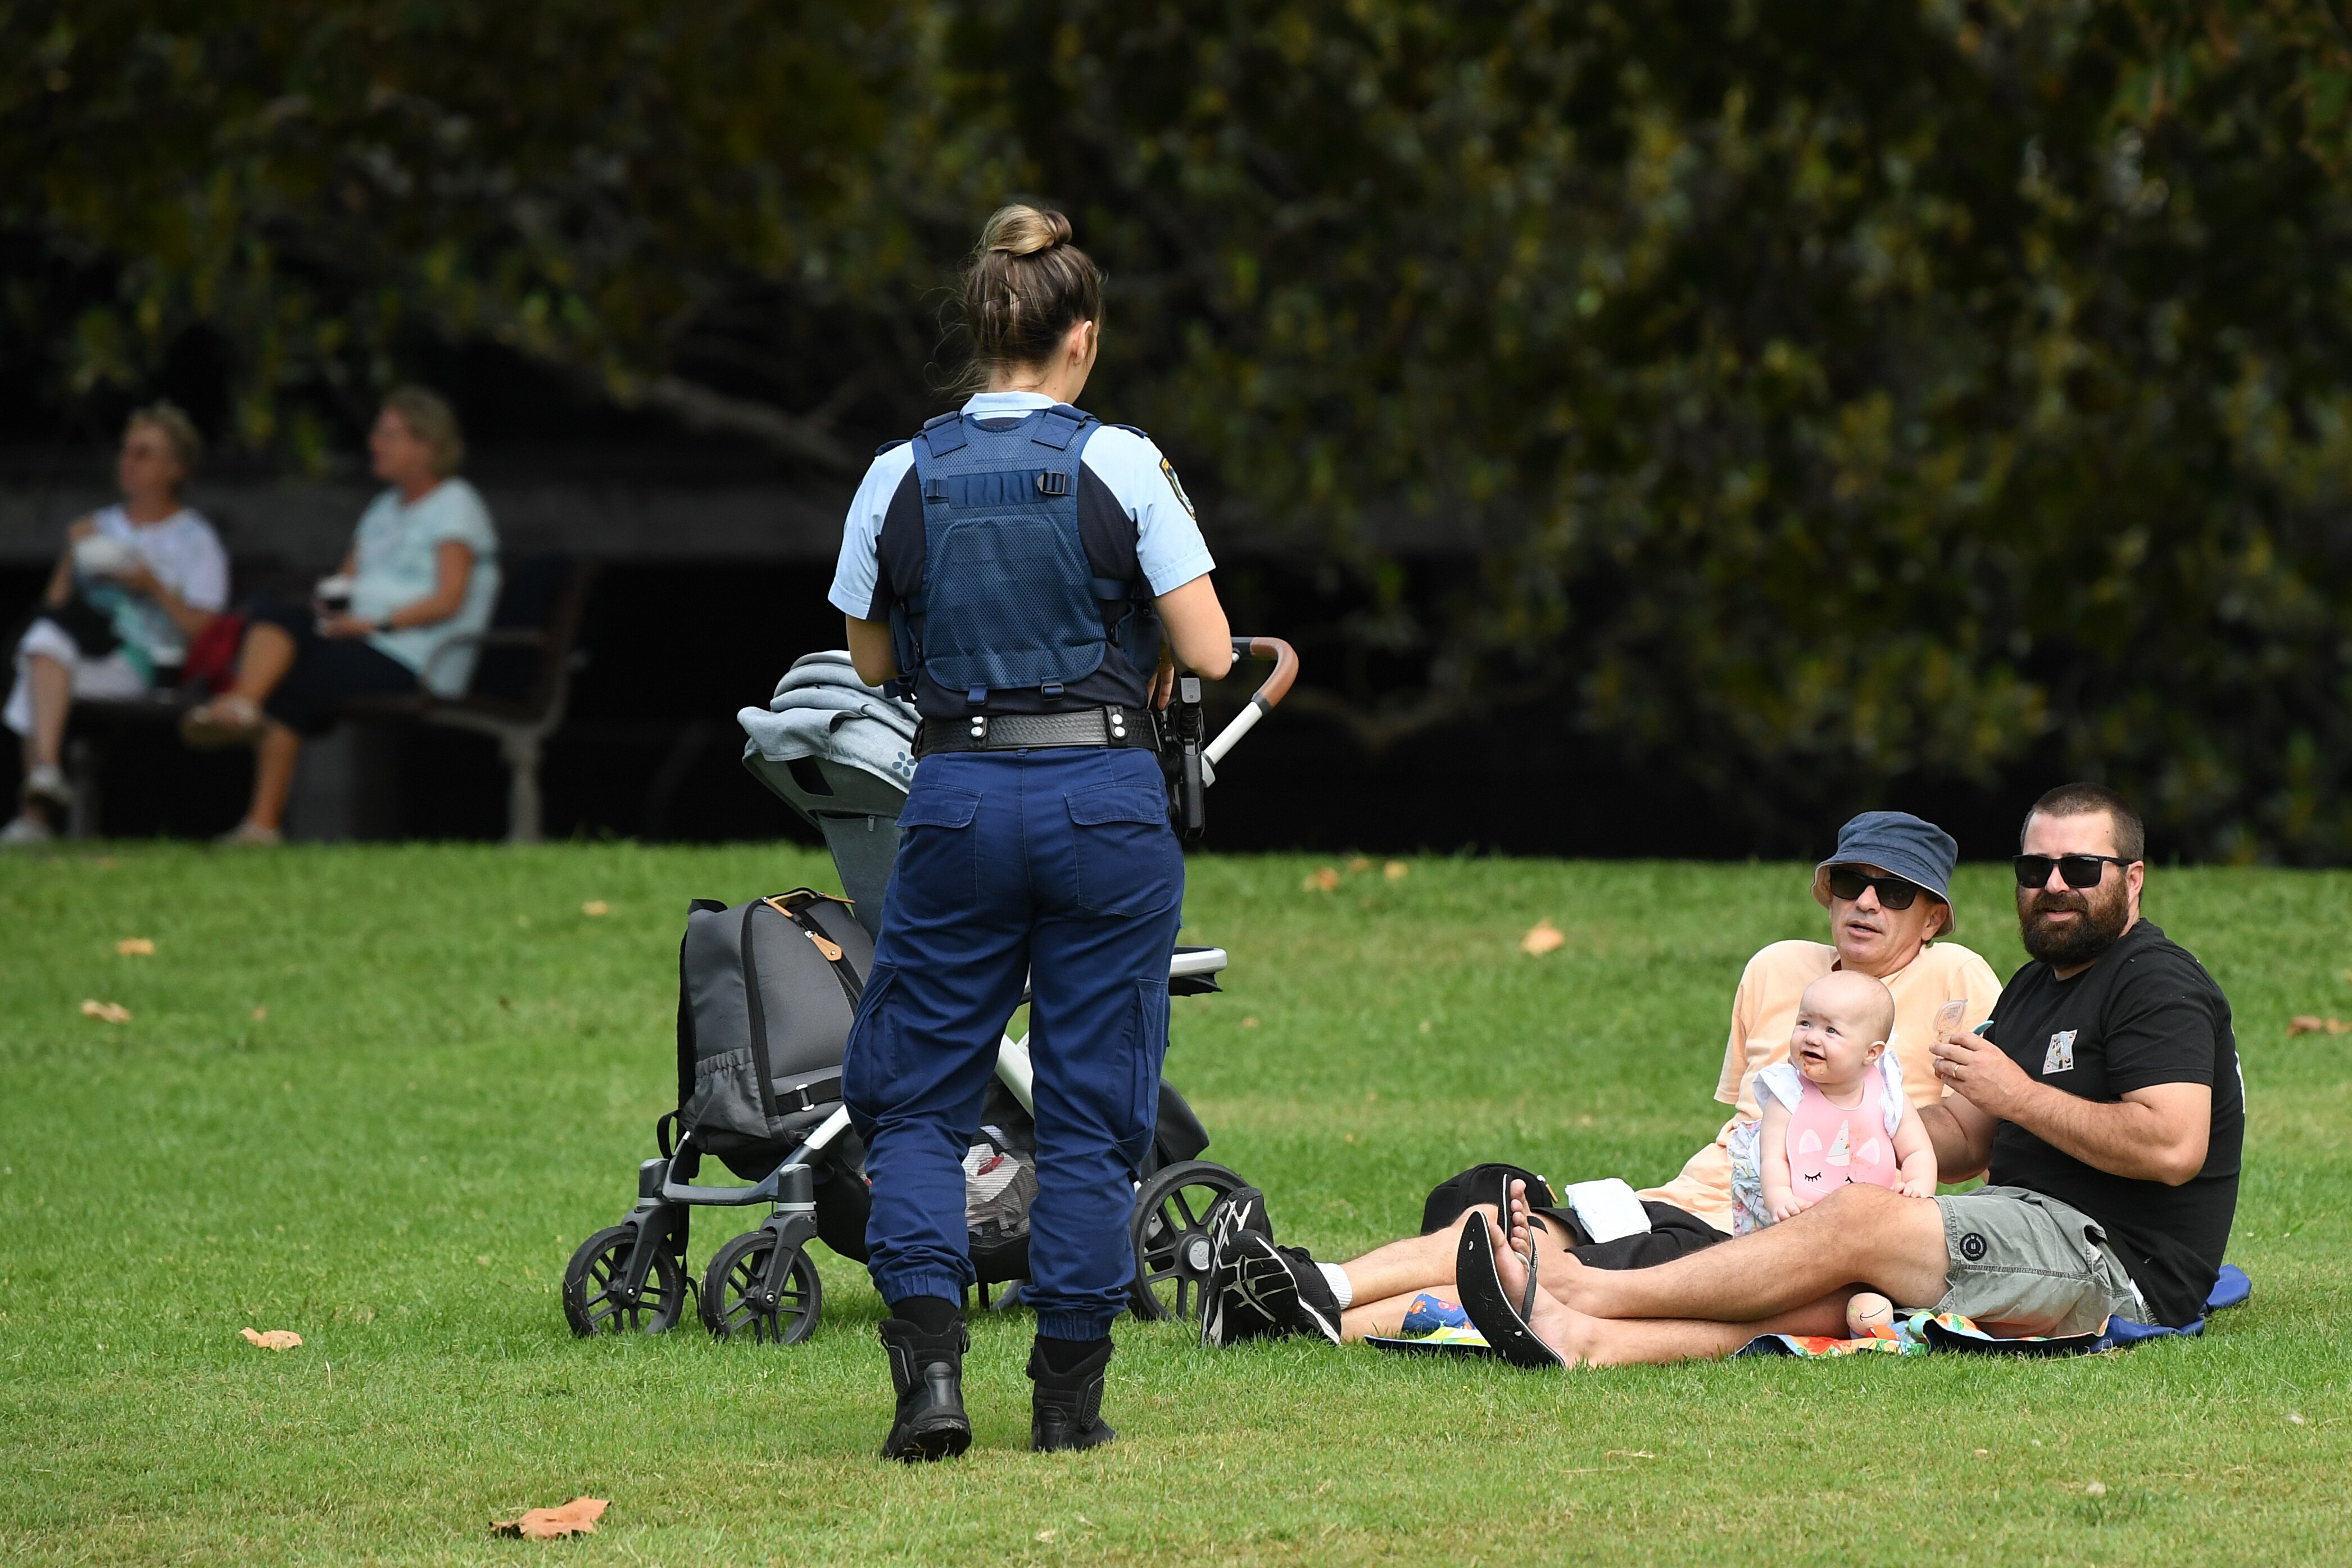 NSW Police officers ask a family to move on while on patrol at Rushcutters Bay park in Sydney.